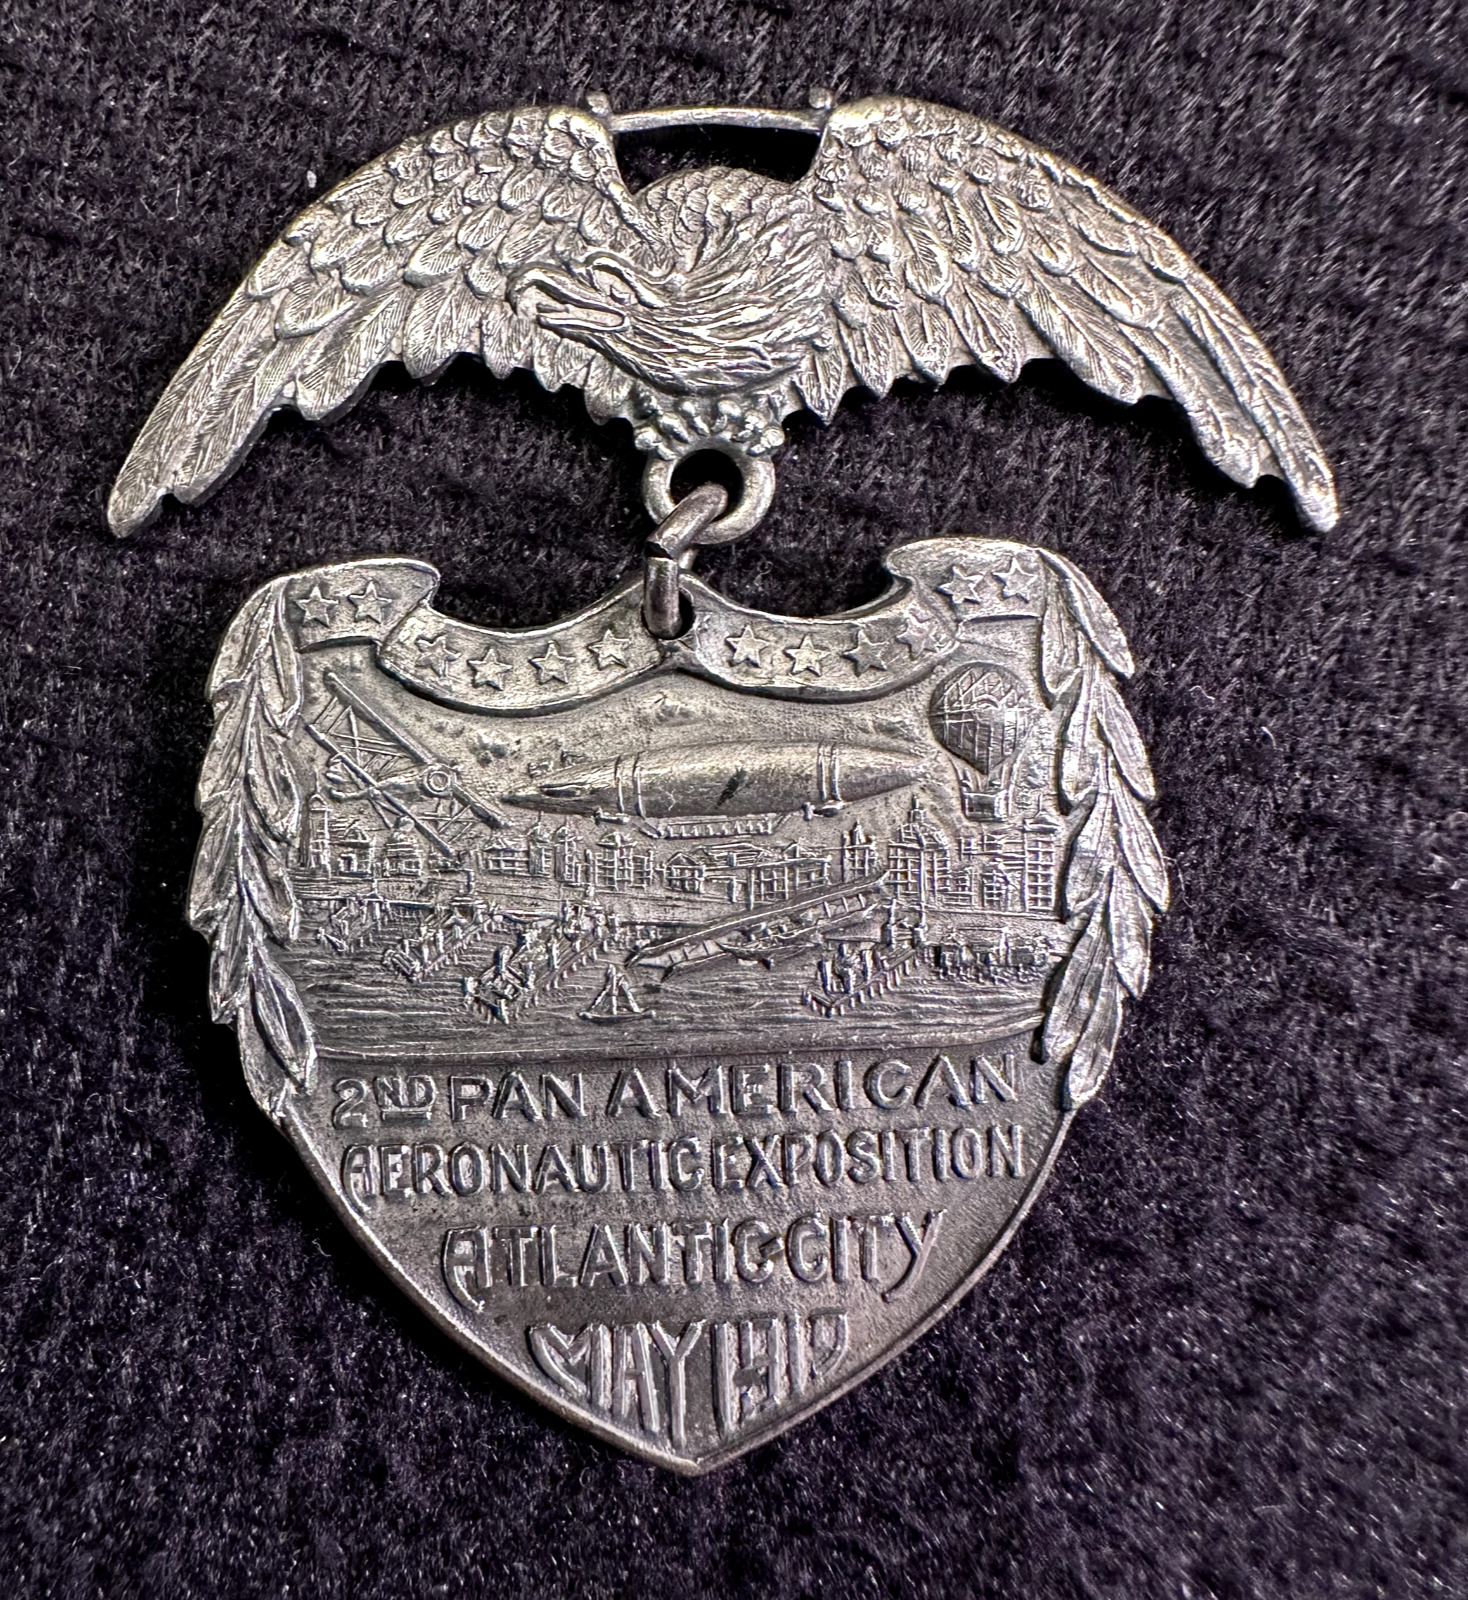 SILVERED BRASS TWO-PIECE FOB FOR: 2ND PAN AMERICAN AERONAUTICAL EXPOSITION ATLAN